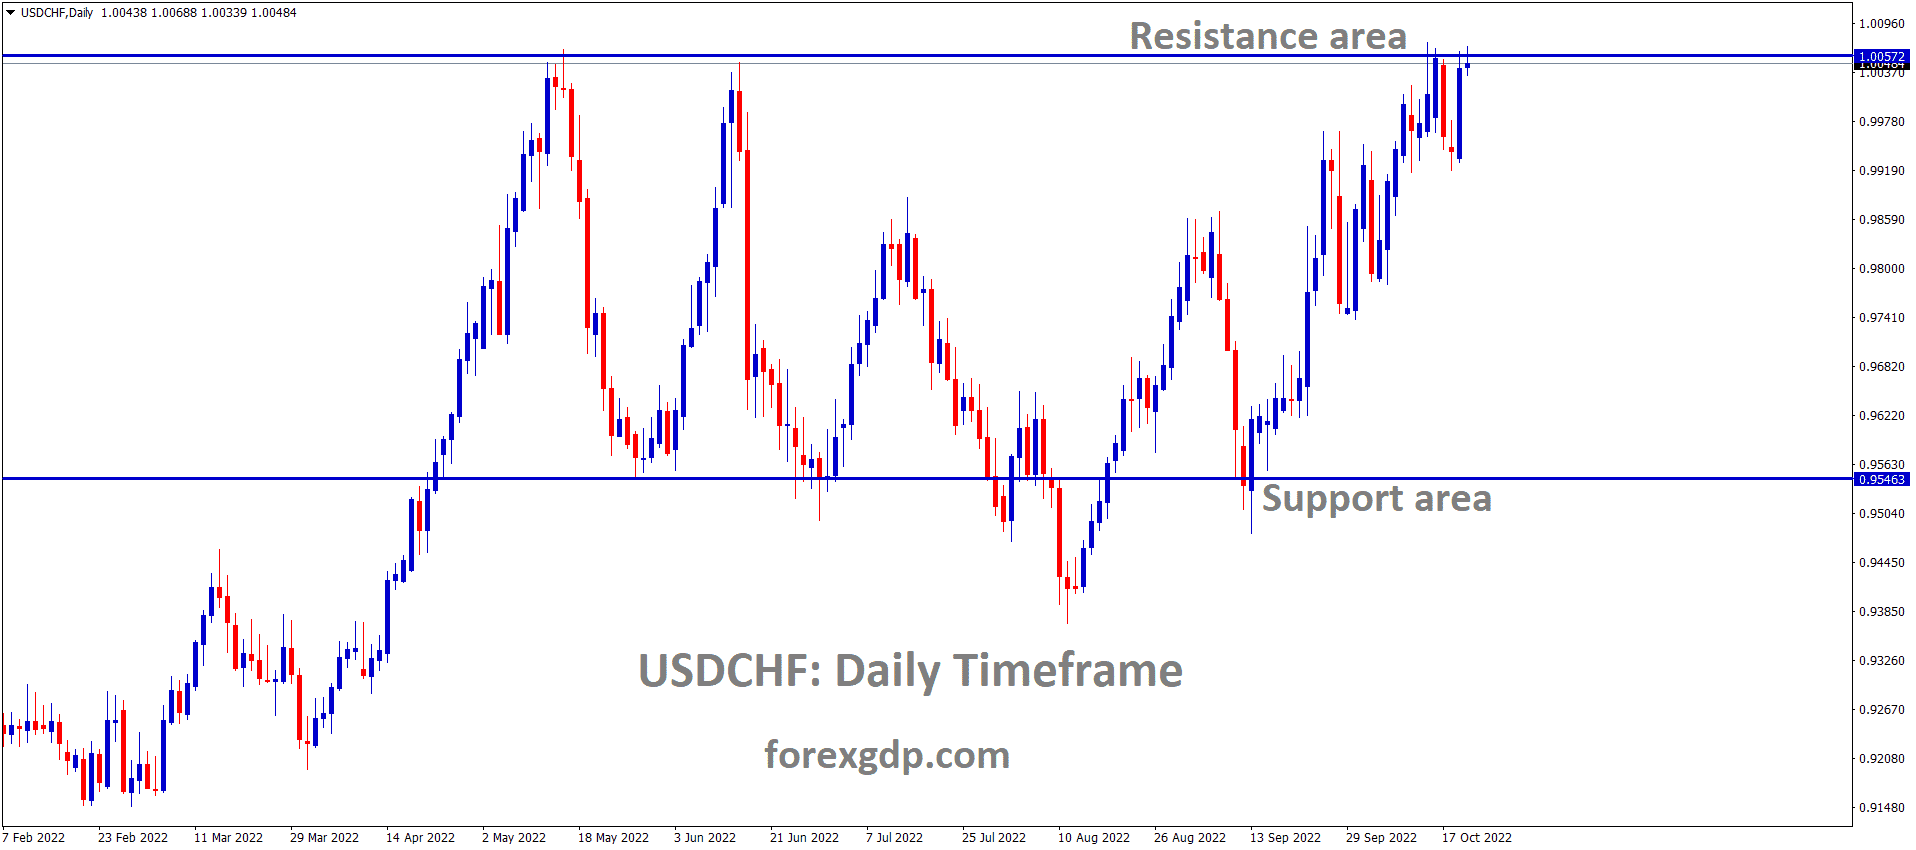 USDCHF is moving in the Box pattern and the market has reached the horizontal resistance area of the pattern